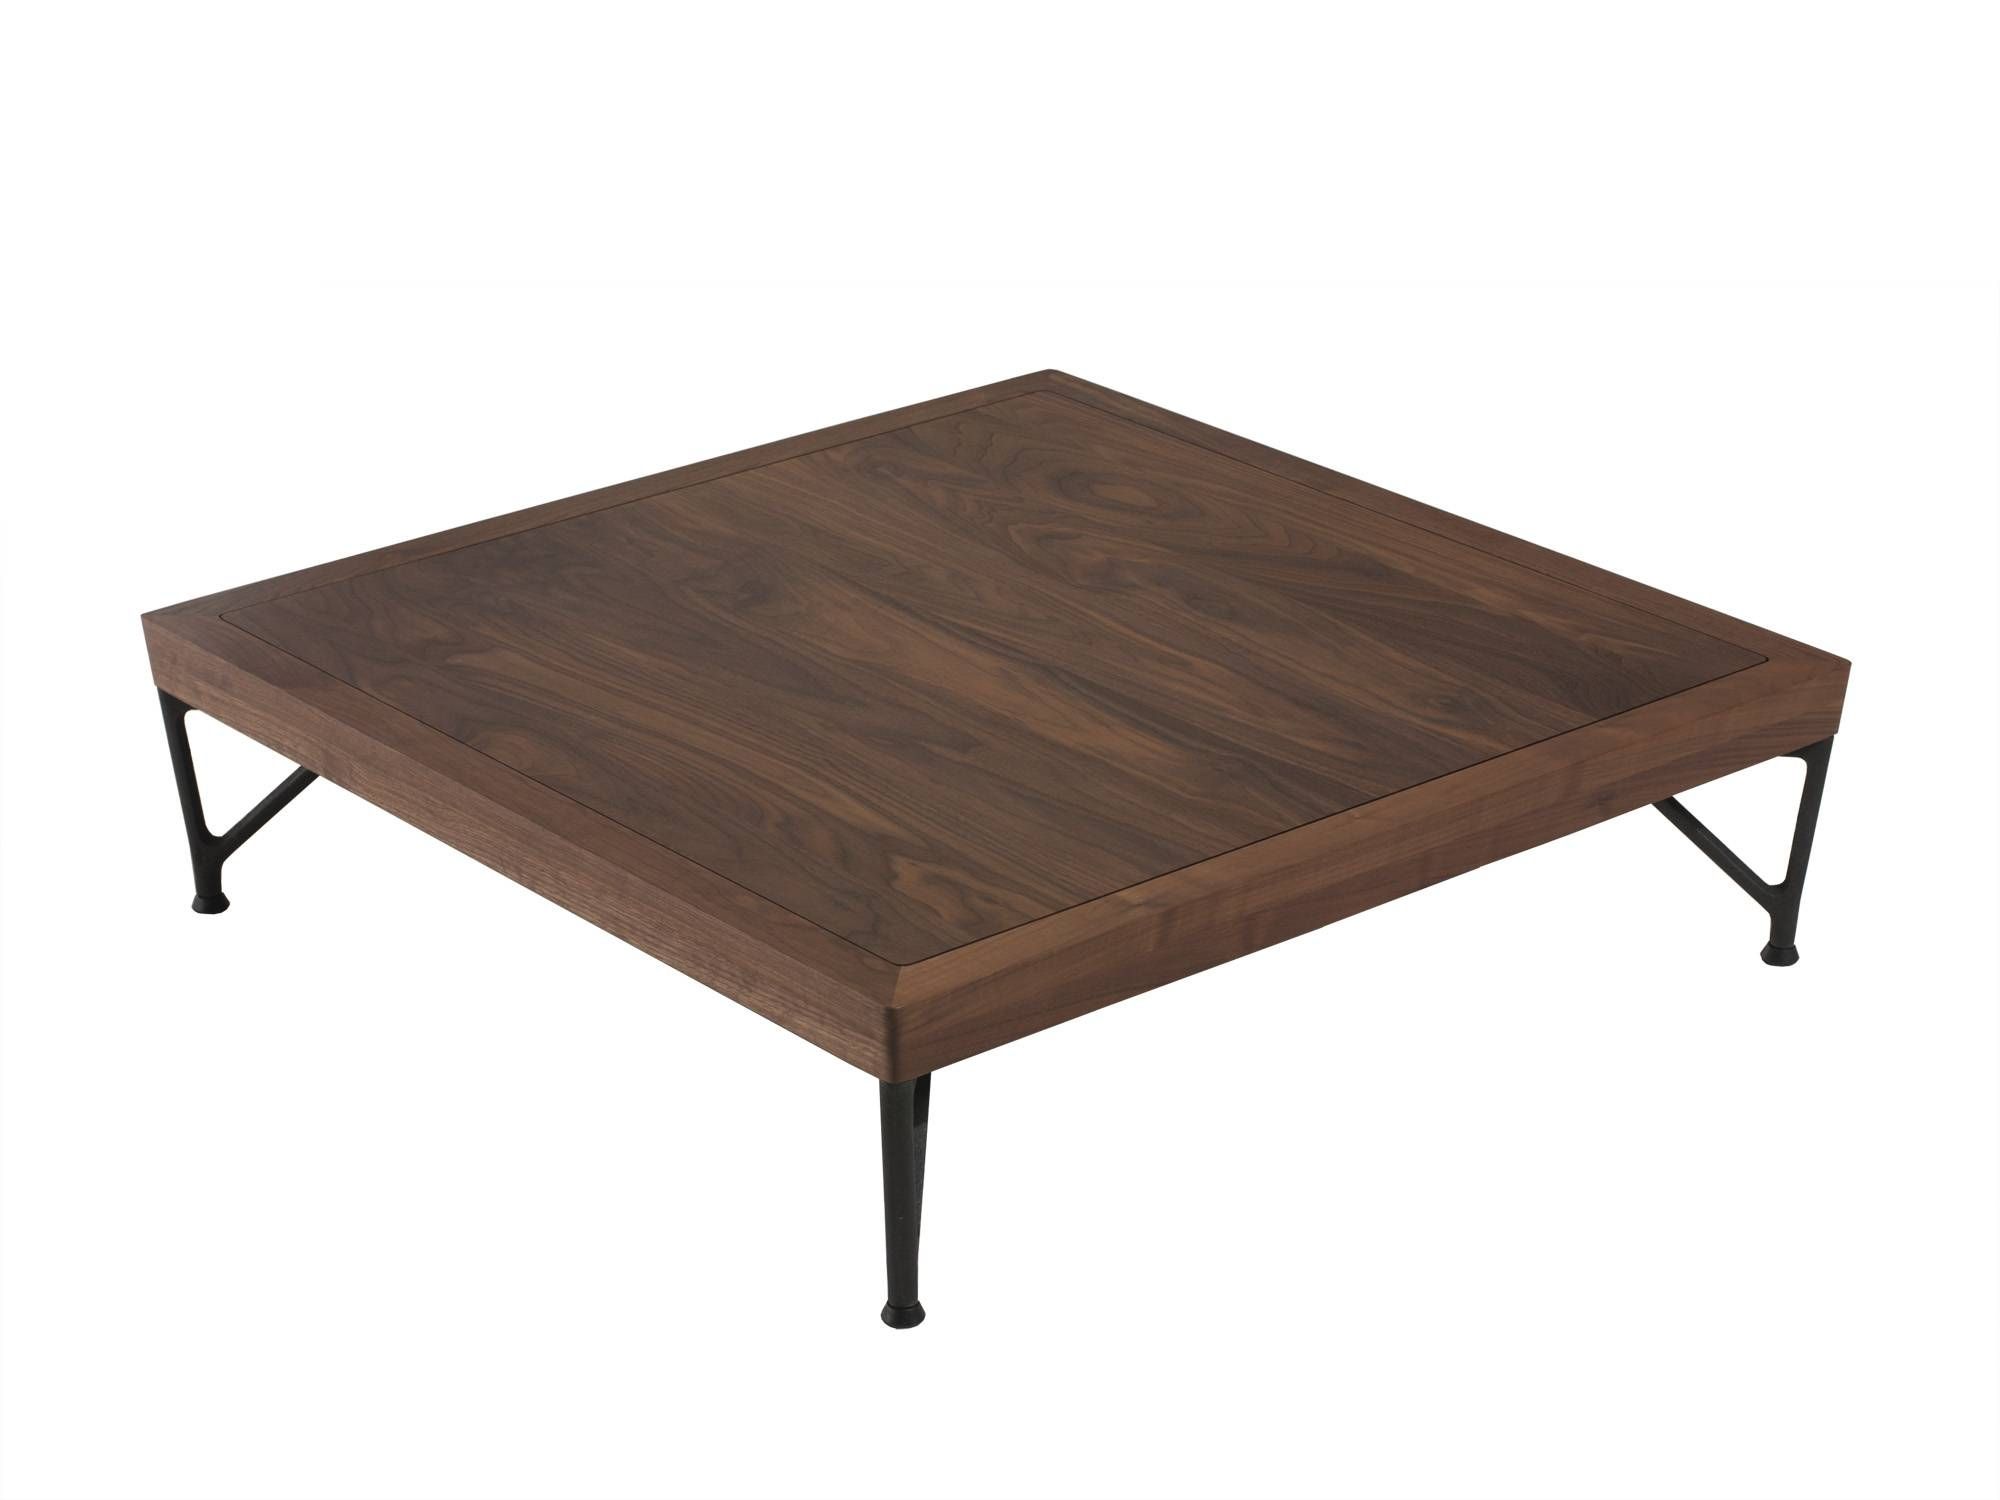 Large Square Coffee Table With Glass Top | Coffee Tables Decoration Within Low Coffee Tables With Drawers (View 11 of 30)